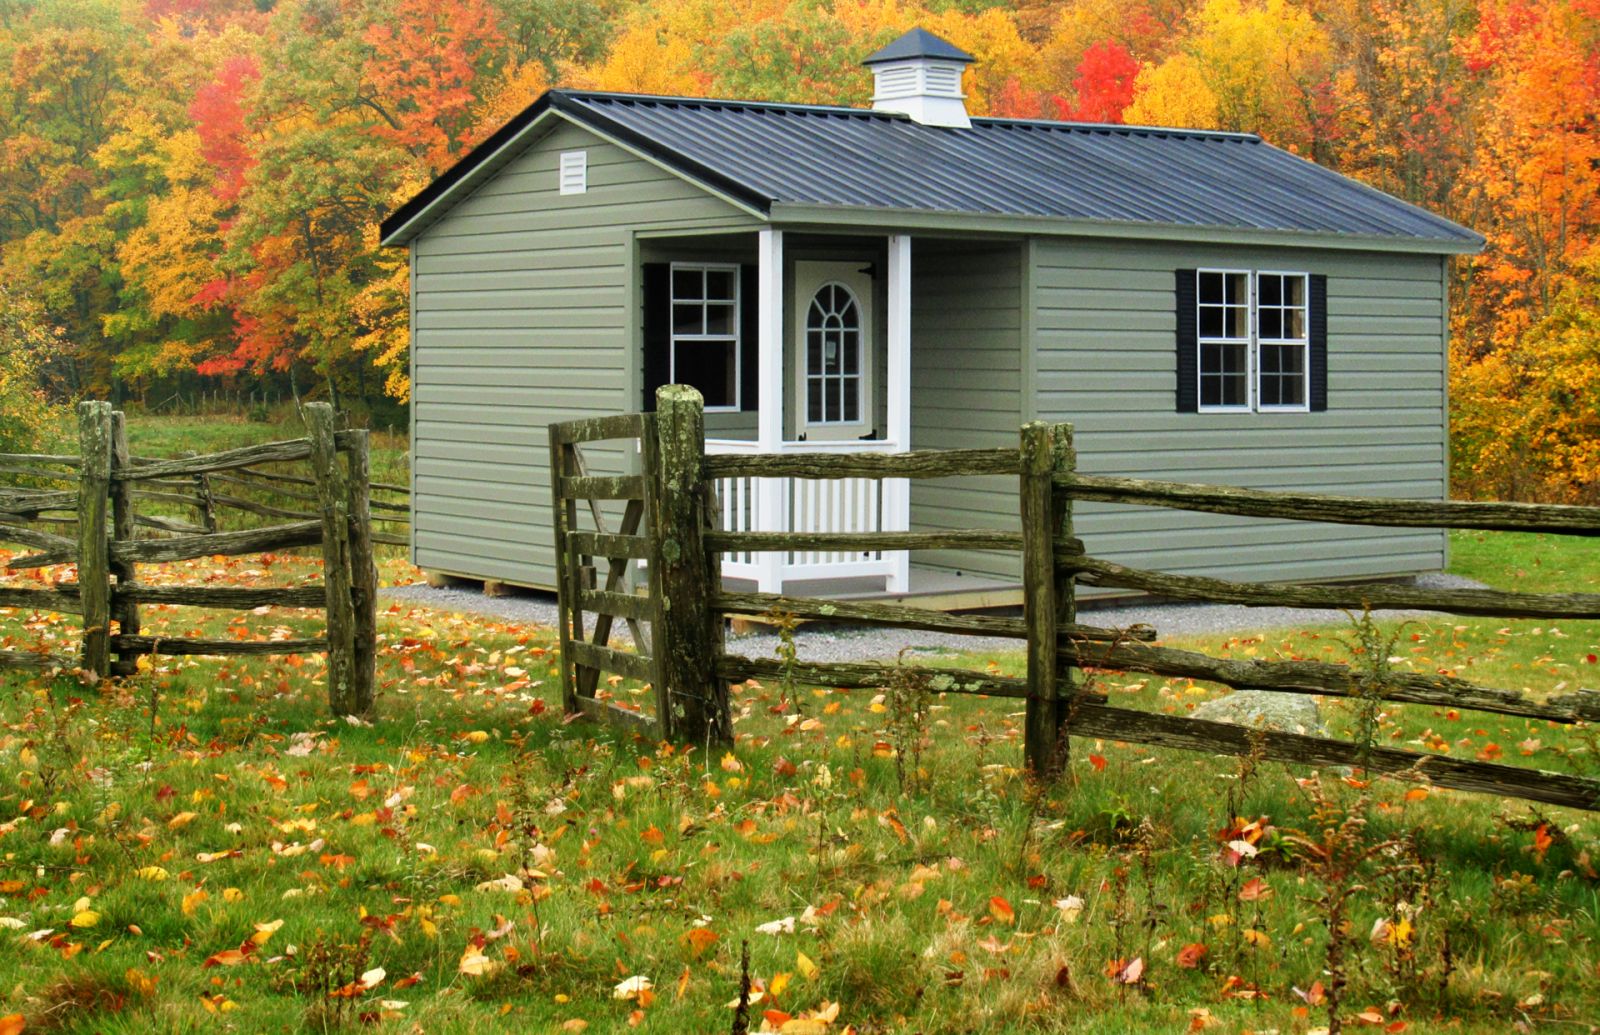 A hunting cabin shed idea